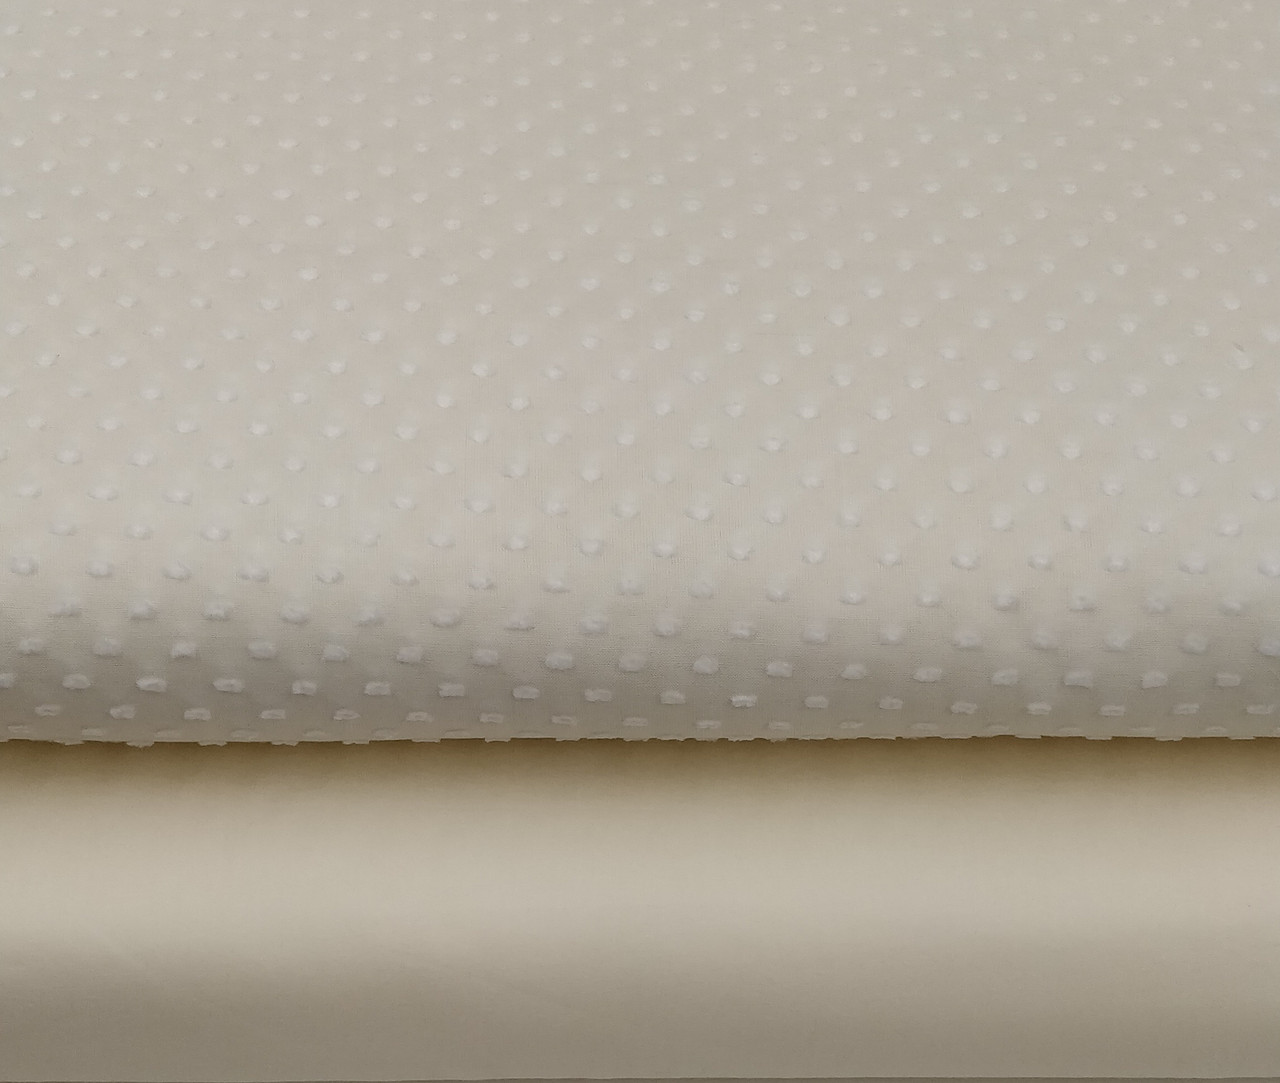 Swiss lemon with white spot fabric shown with lemon lawn - ideal for a dress and petticoat